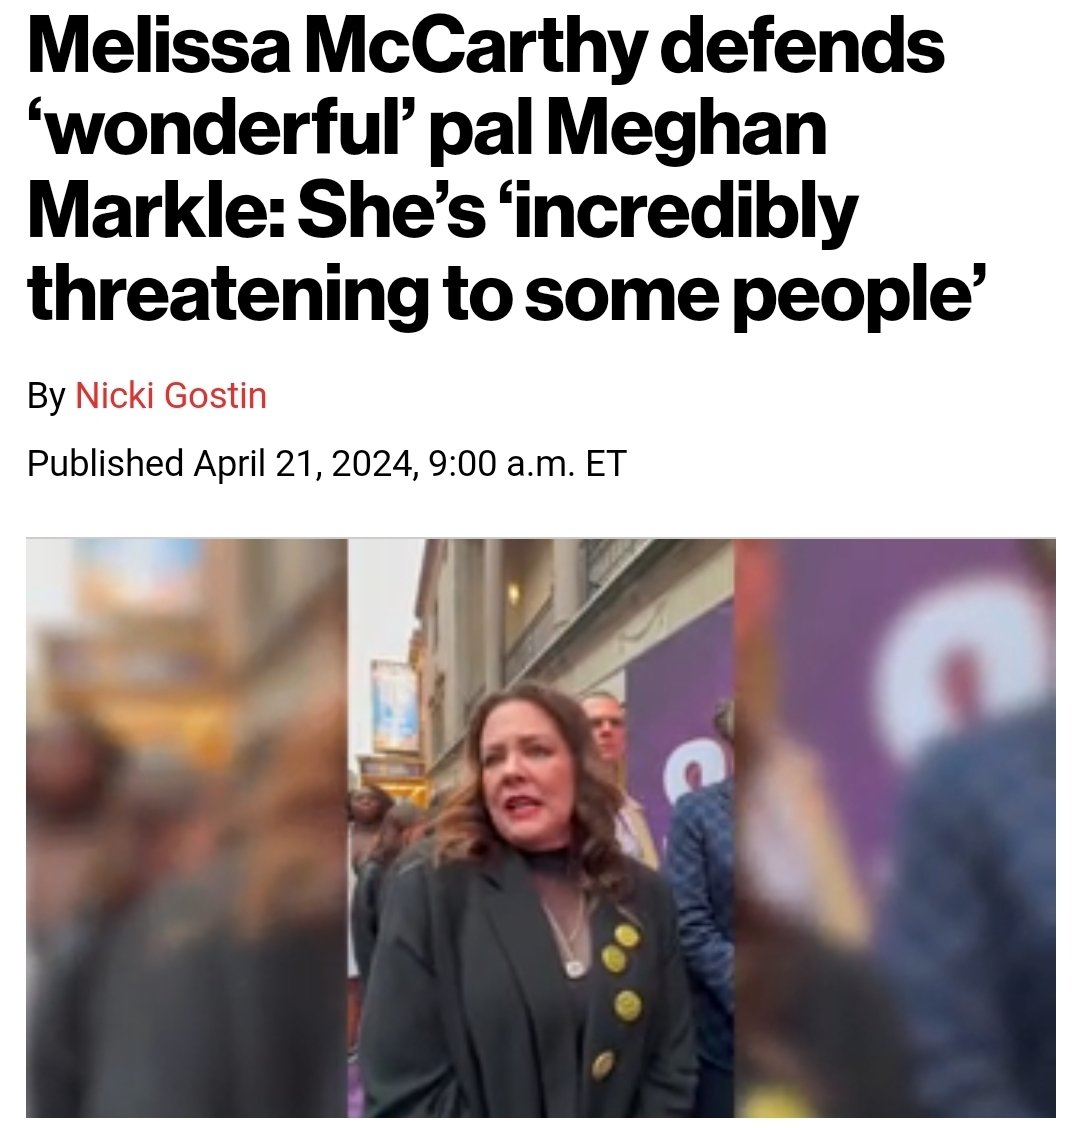 Melissa McCarthy has Meghan Markle’s back: “It bums me out for every woman and every person, that for no reason people just like to attack, A smart interesting woman that has her own life, for some reason, is incredibly threatening to some people.' She told Page Six